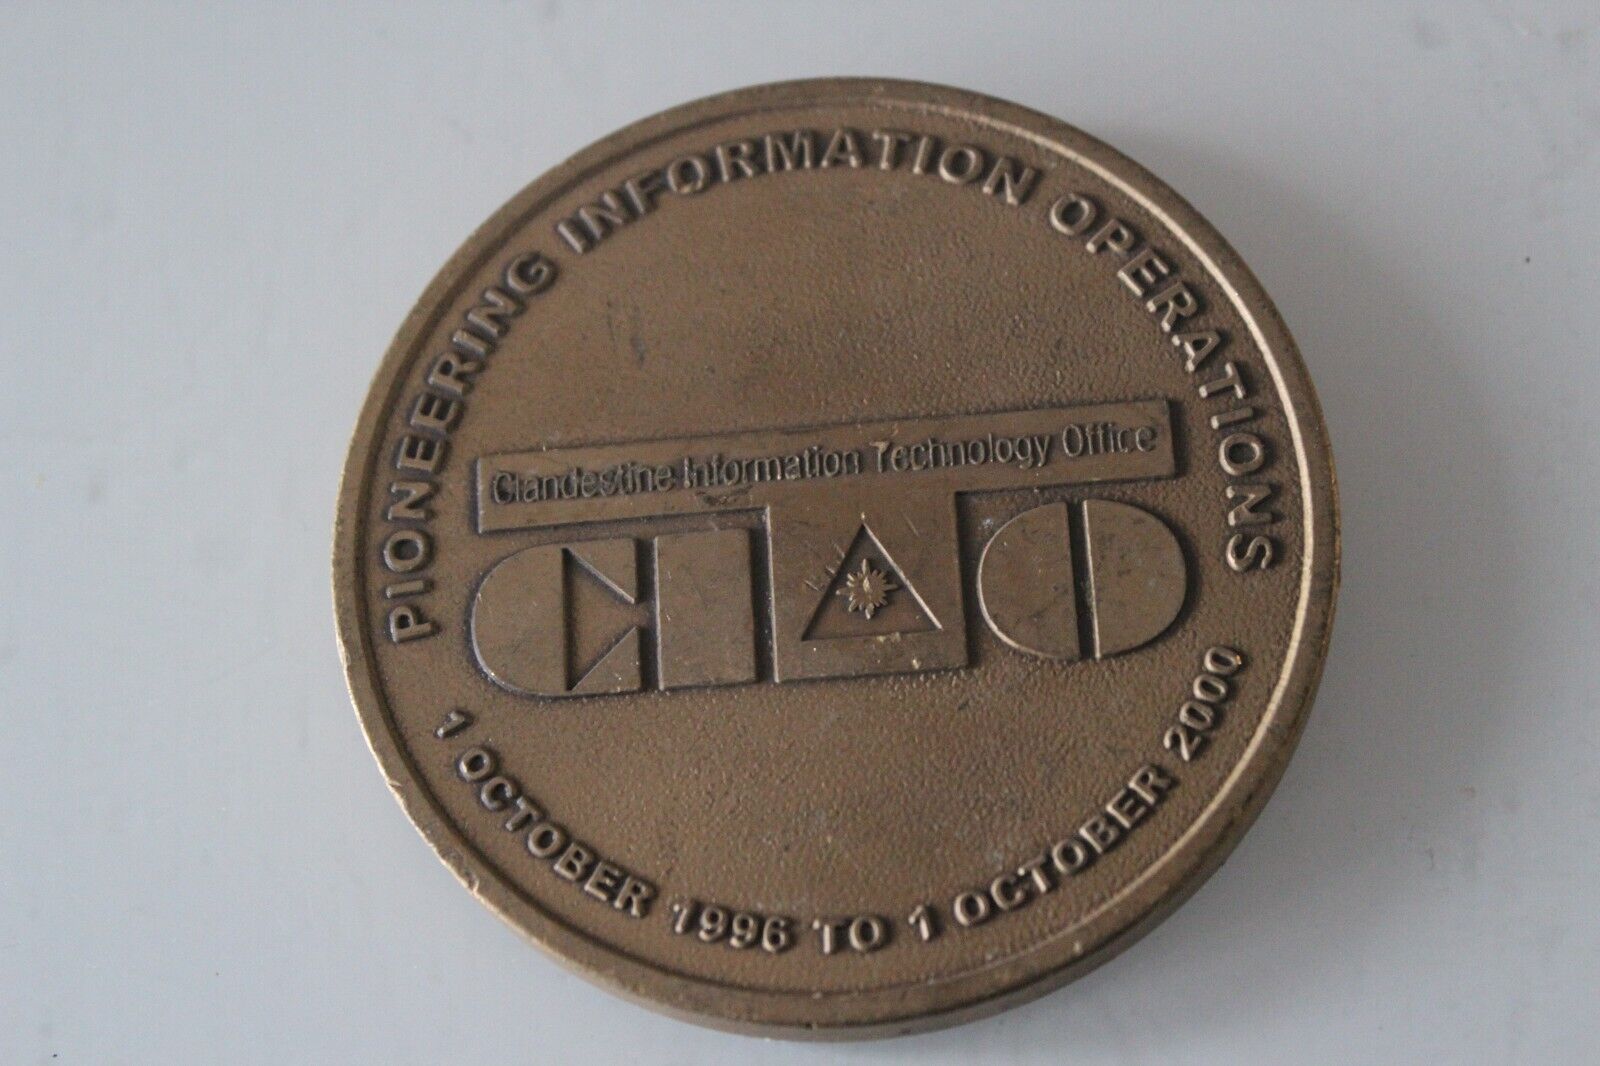 CIA Pioneering Information Operations Challenge Coin